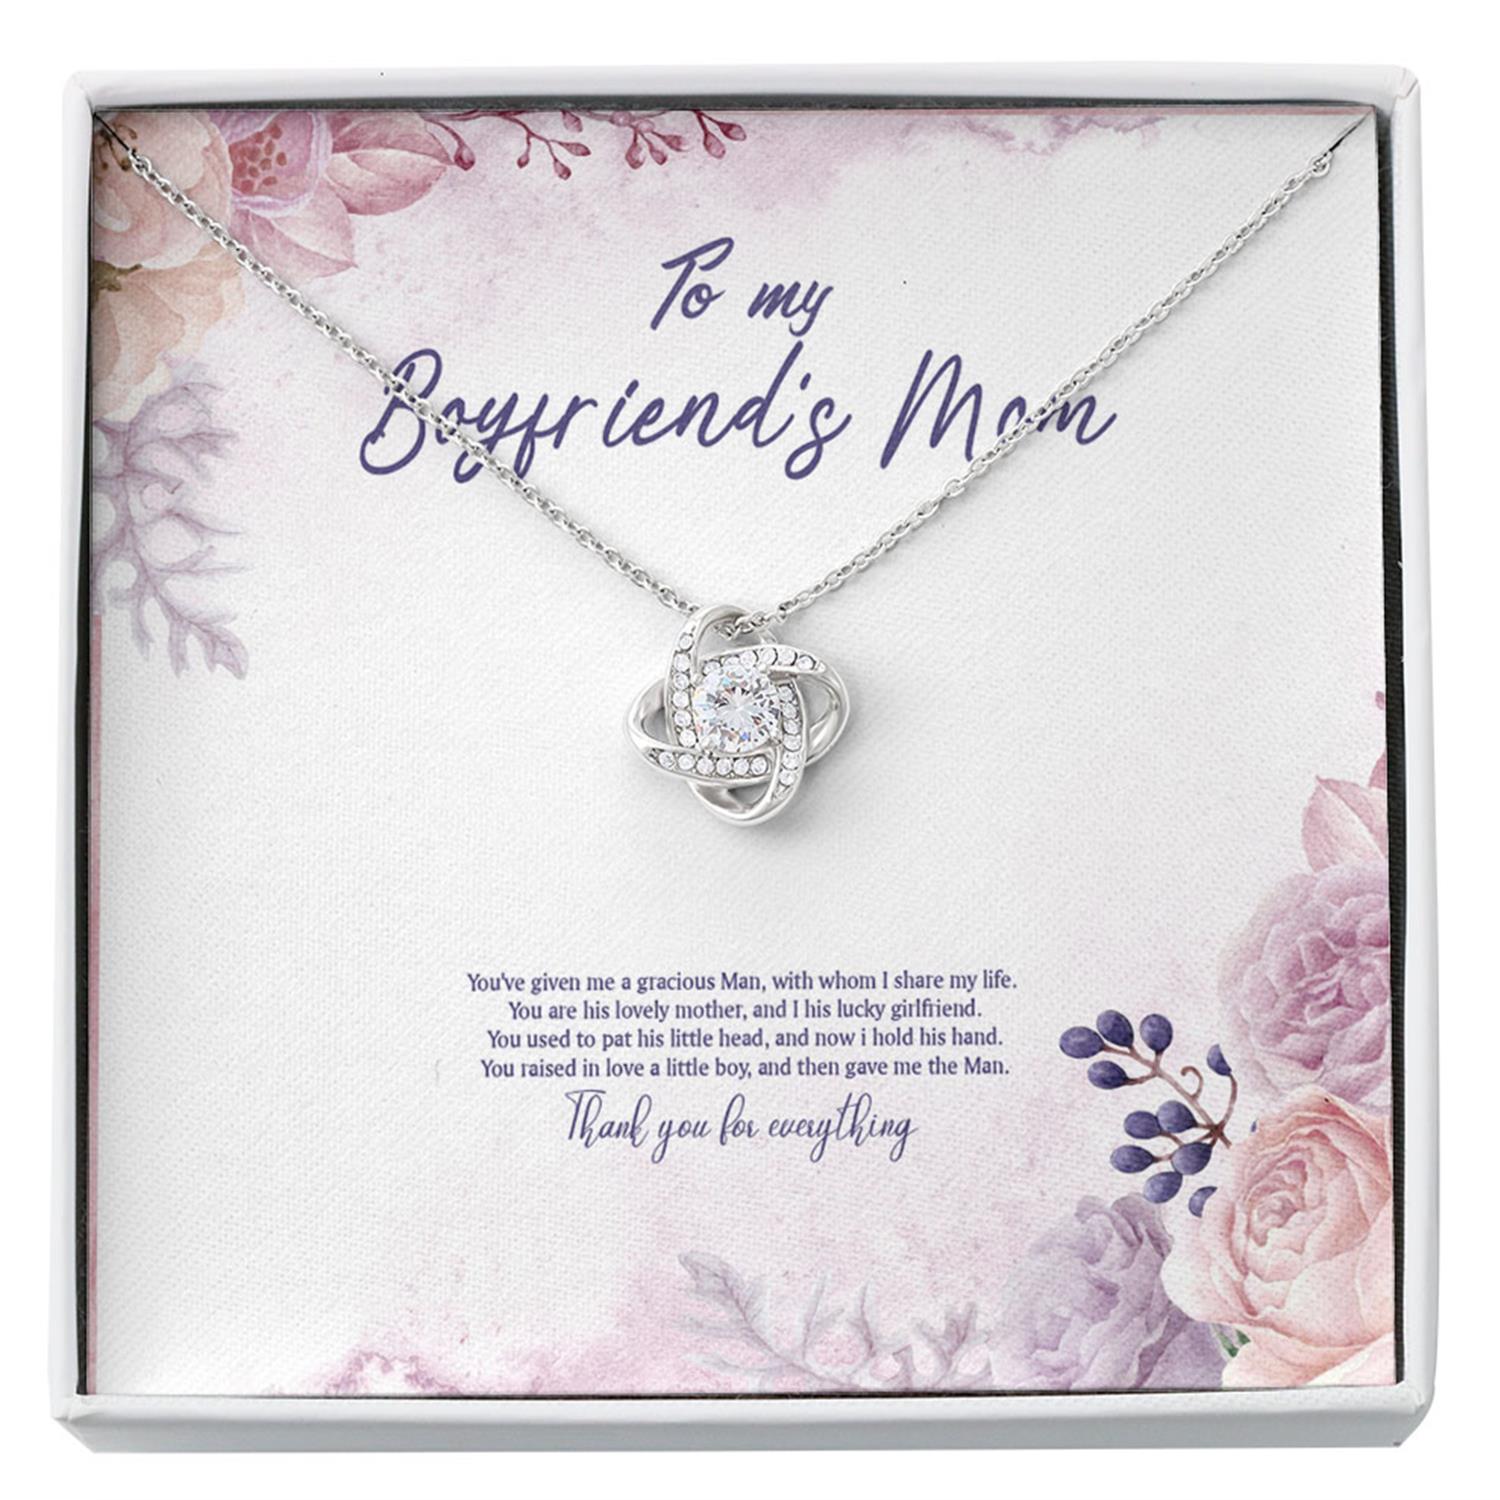 Mother-in-law Necklace, Boyfriend's Mom Necklace, Presents For Mother Gifts, Raise Boy Thank Custom Necklace